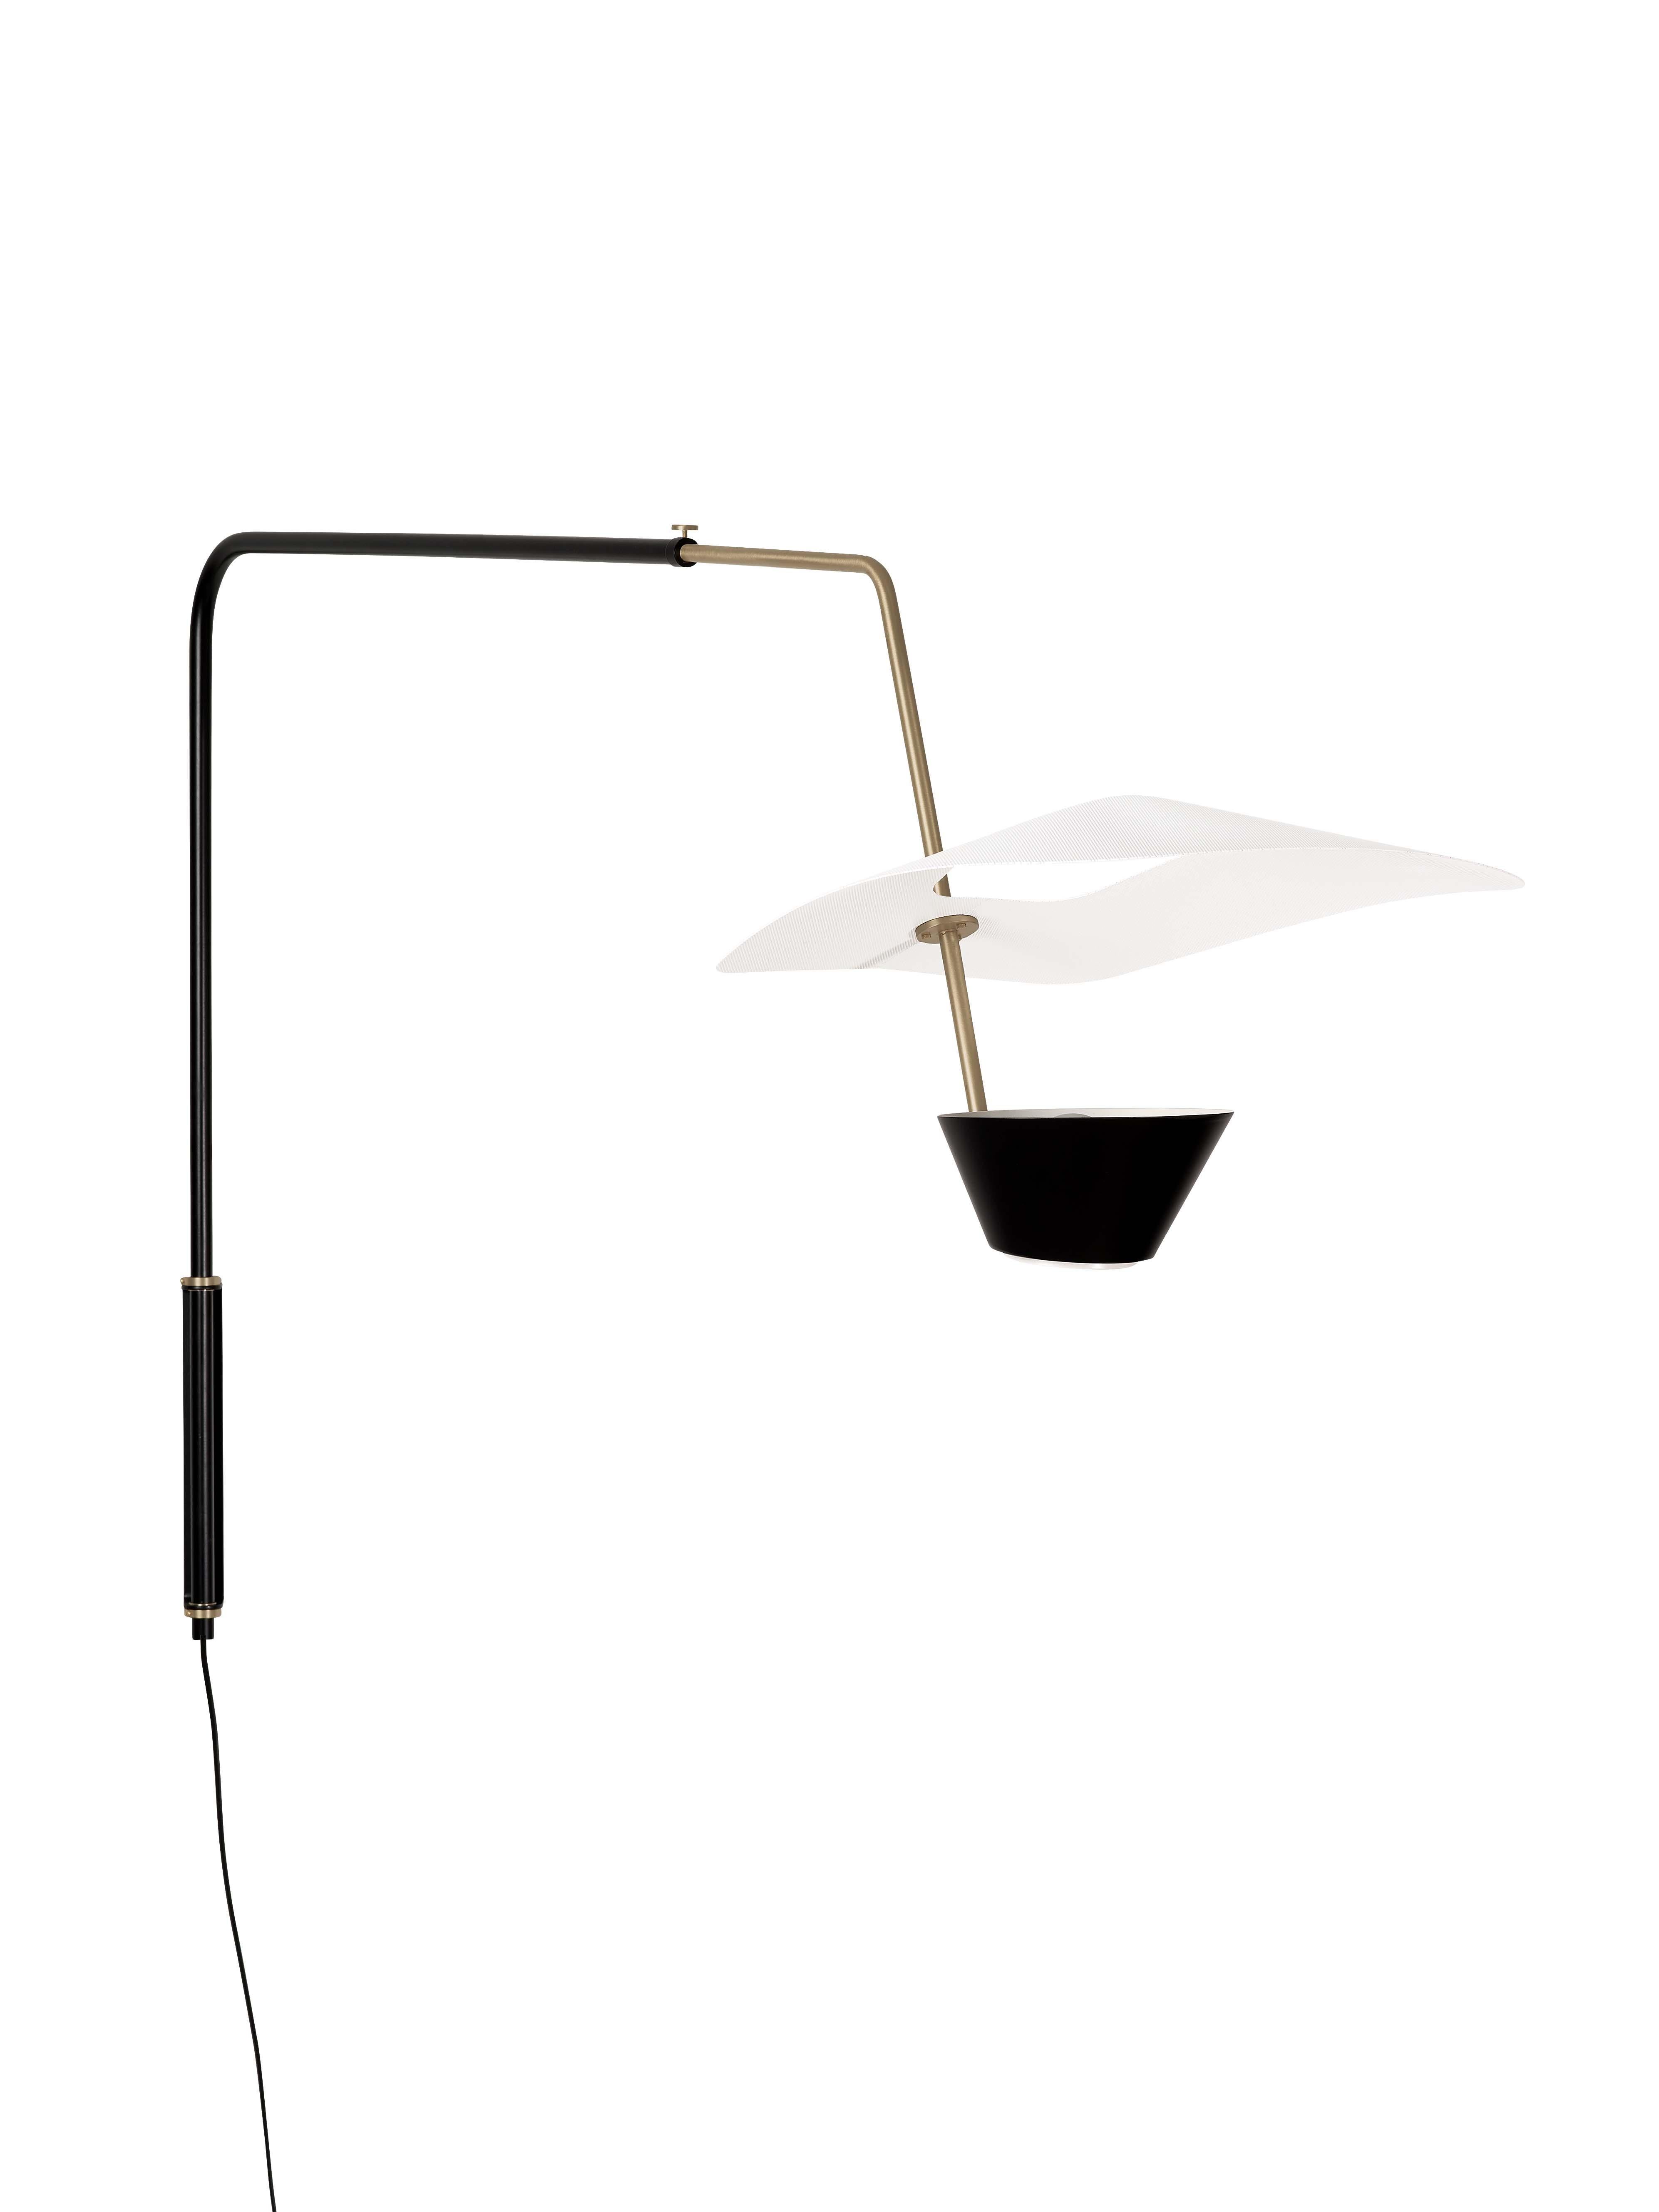 Large Pierre Guariche 'G25' Articulating Wall Lamp for Sammode Studio For Sale 6